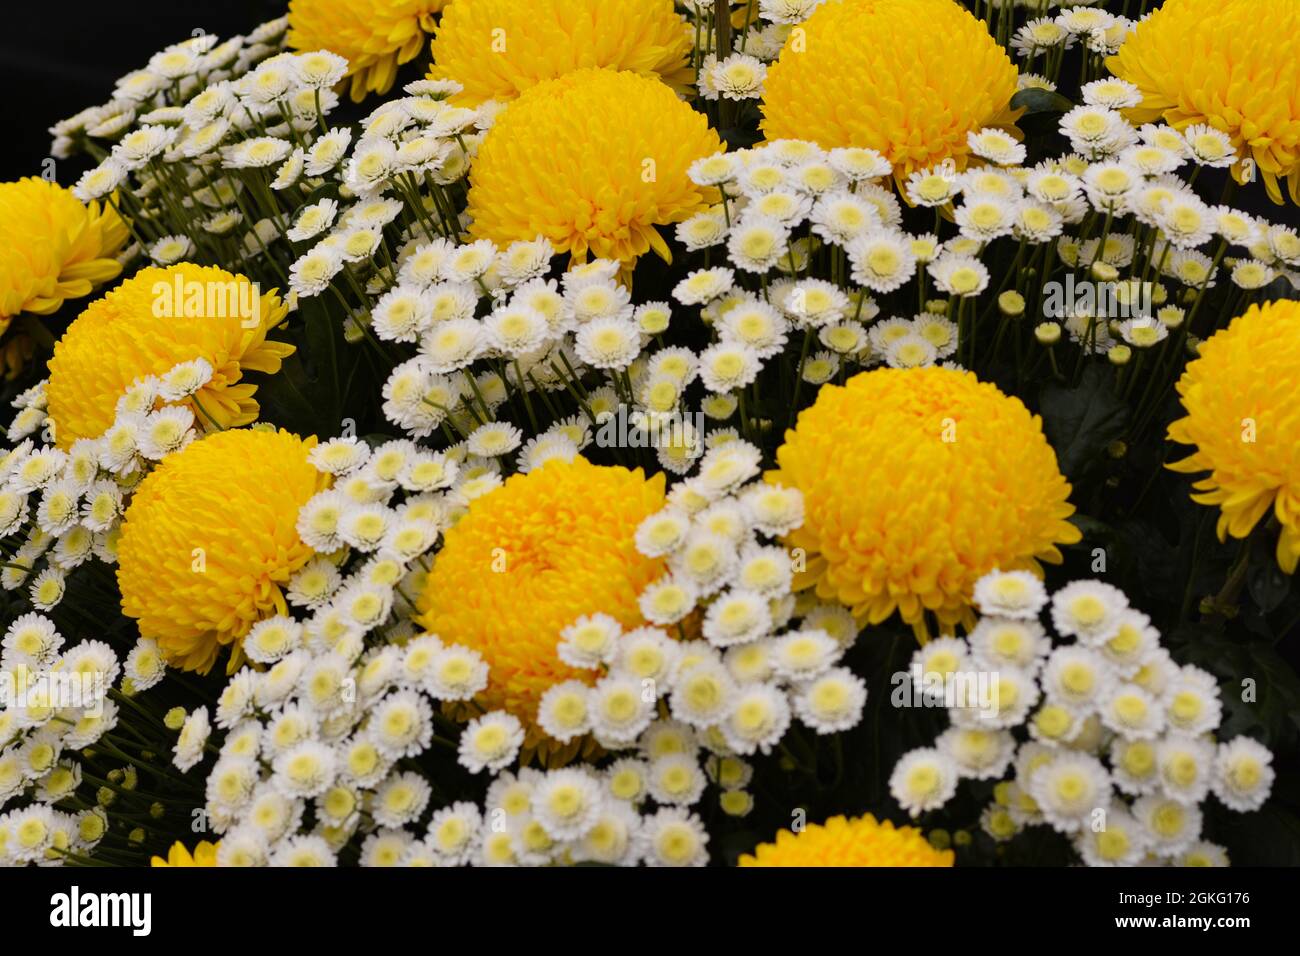 Big, yellow marigolds with small white flowers. Stock Photo